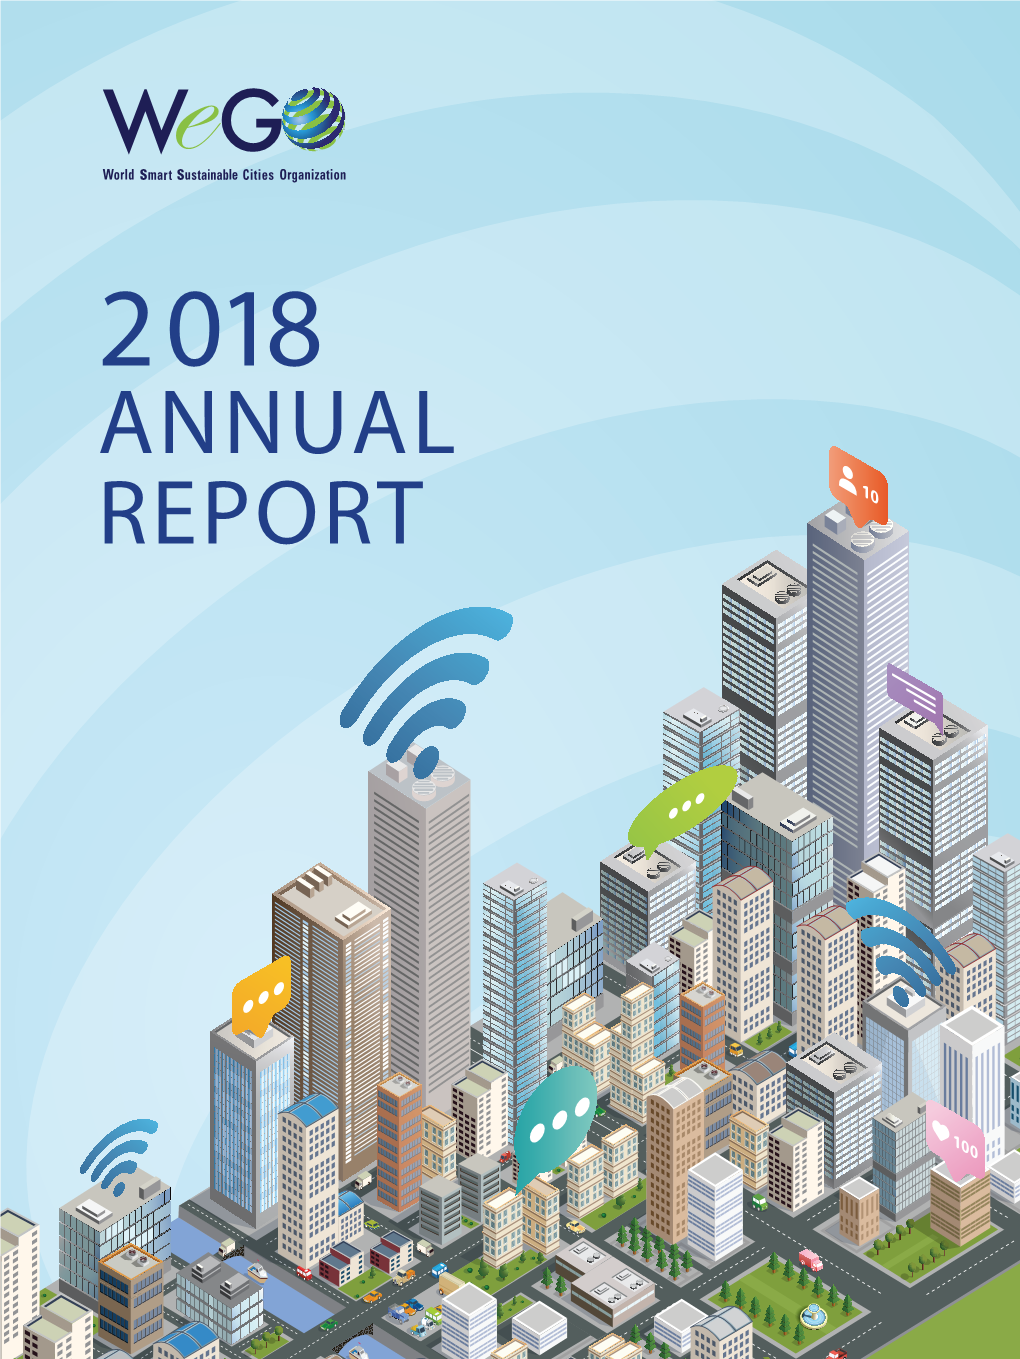 ANNUAL REPORT About Wego